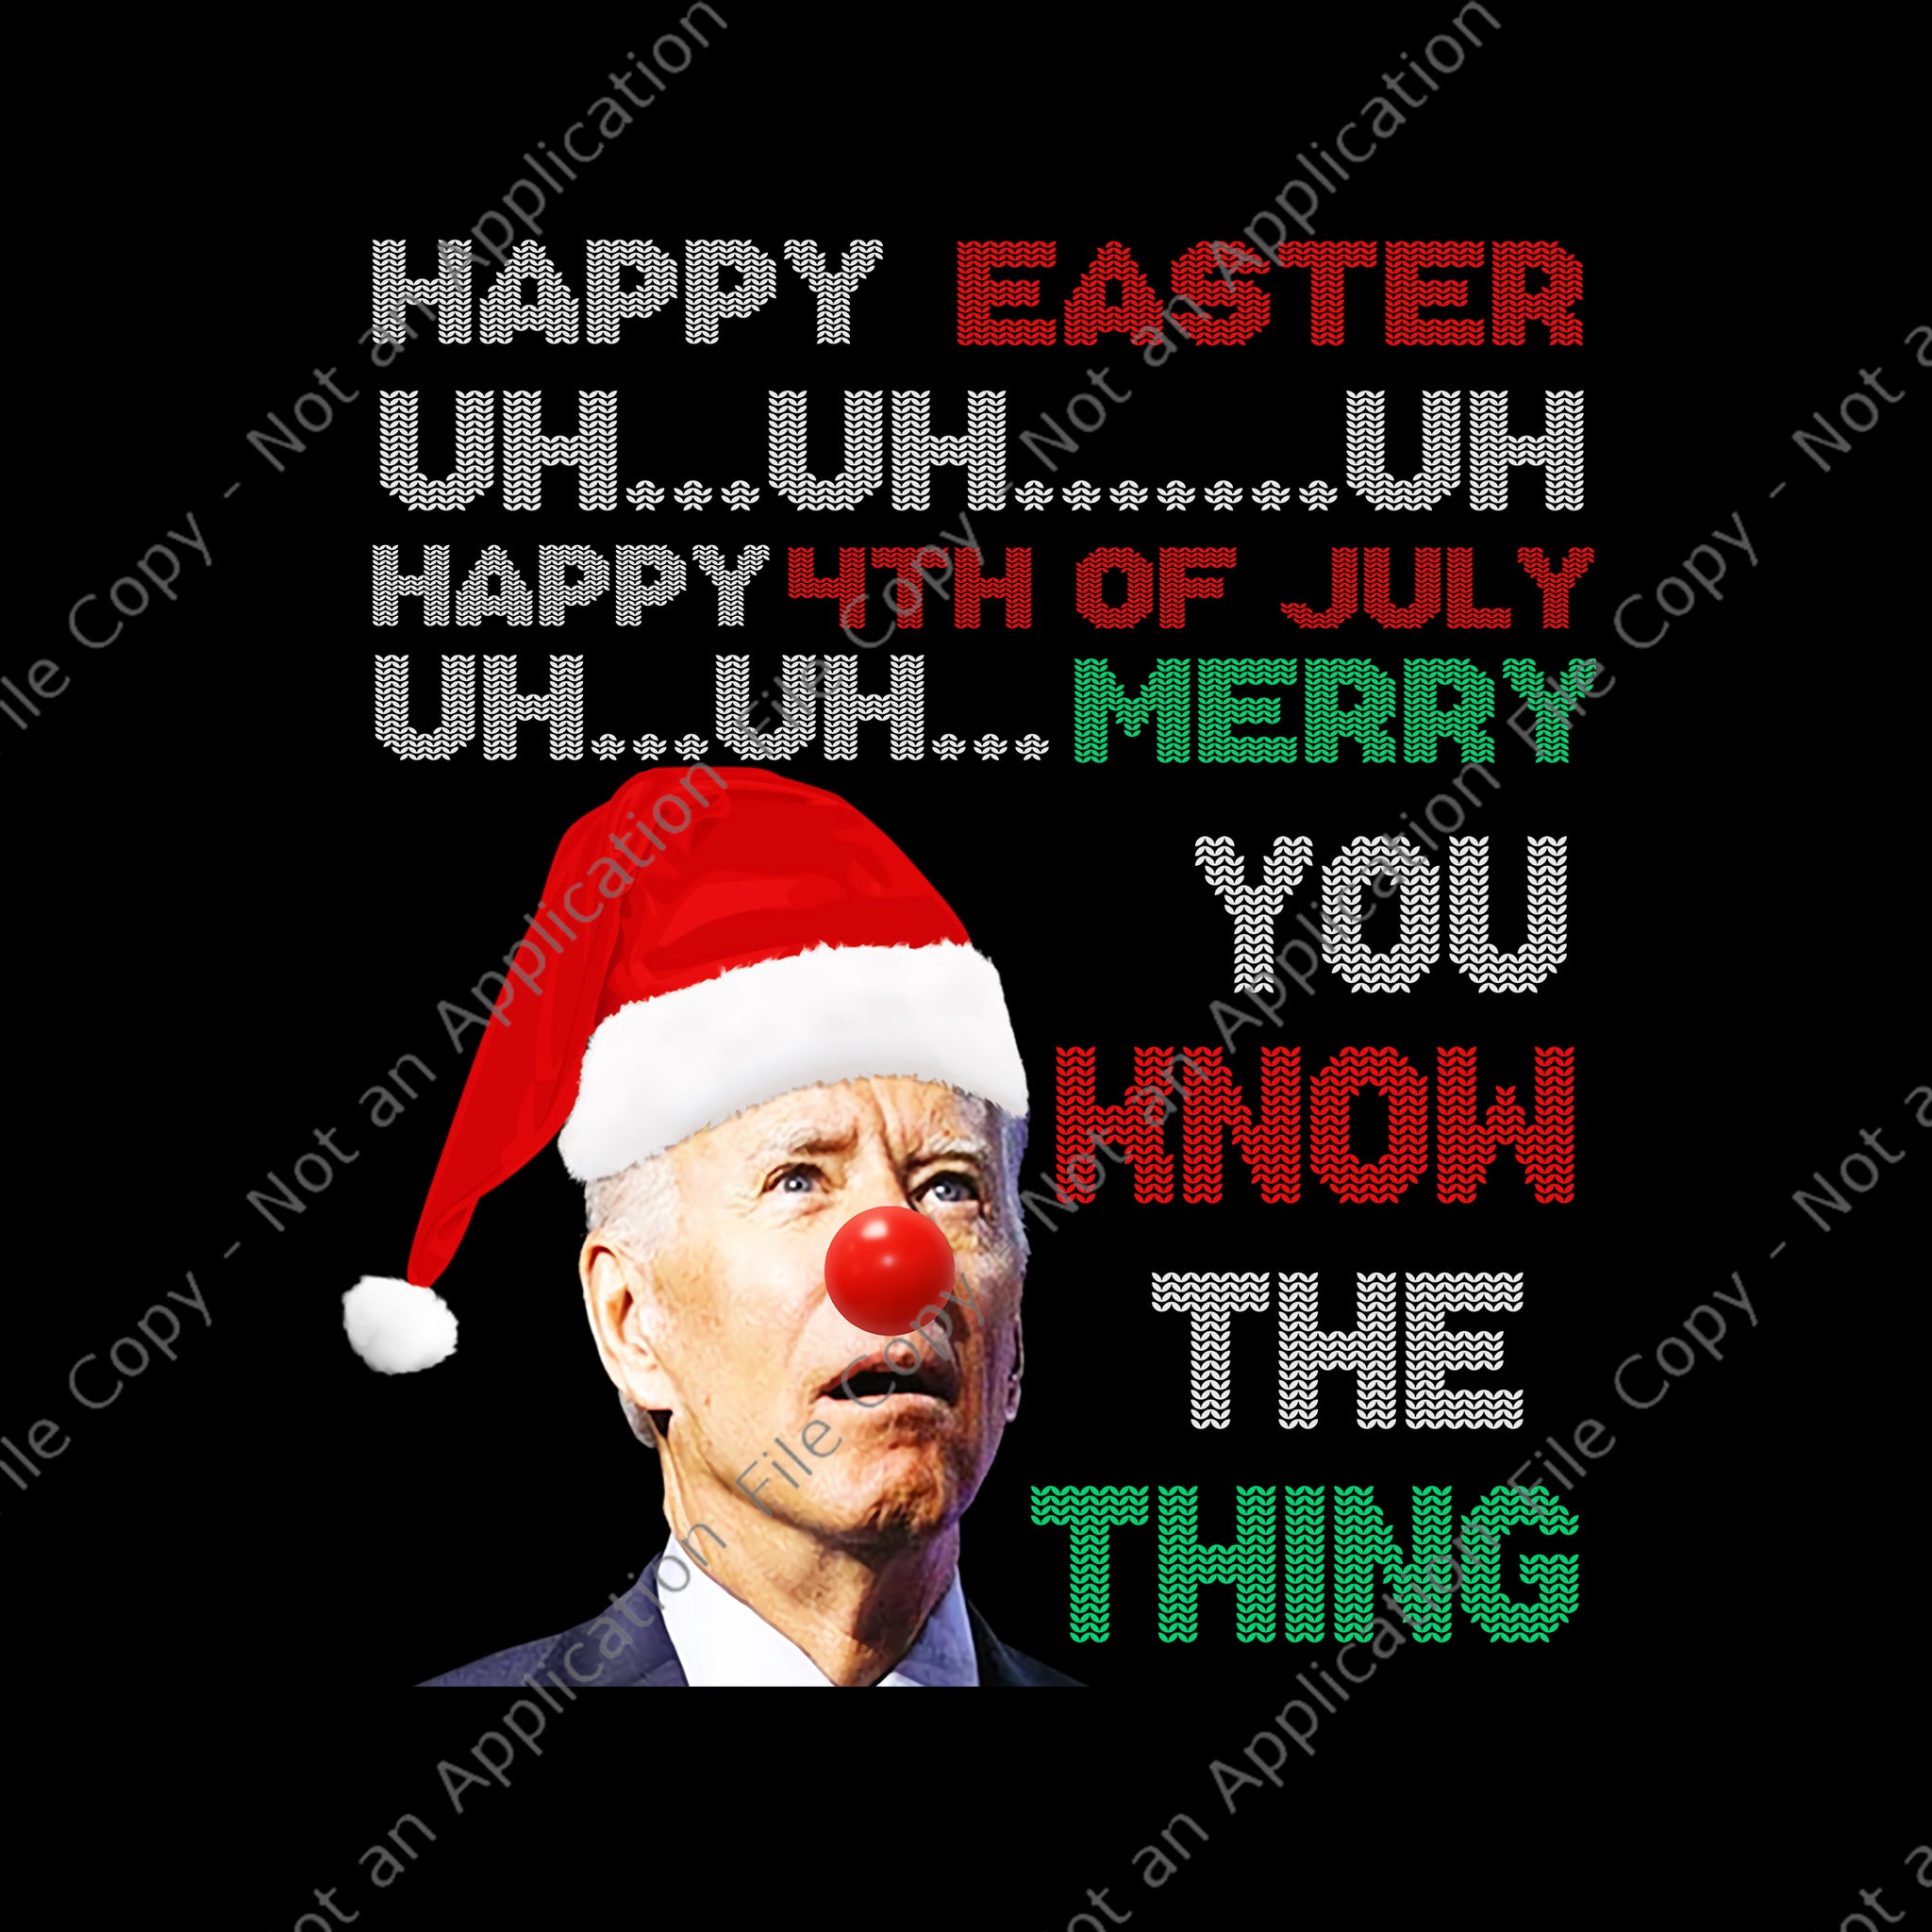 Happy Easter Uh Uh Uh Happy 4th Of July Png, Merry You Know The Thing Png, Funny Christmas Sweater Png, Joe Biden Santa Hat Happy Easter Uh Uh Uh Png, Joe Biden Santa Png